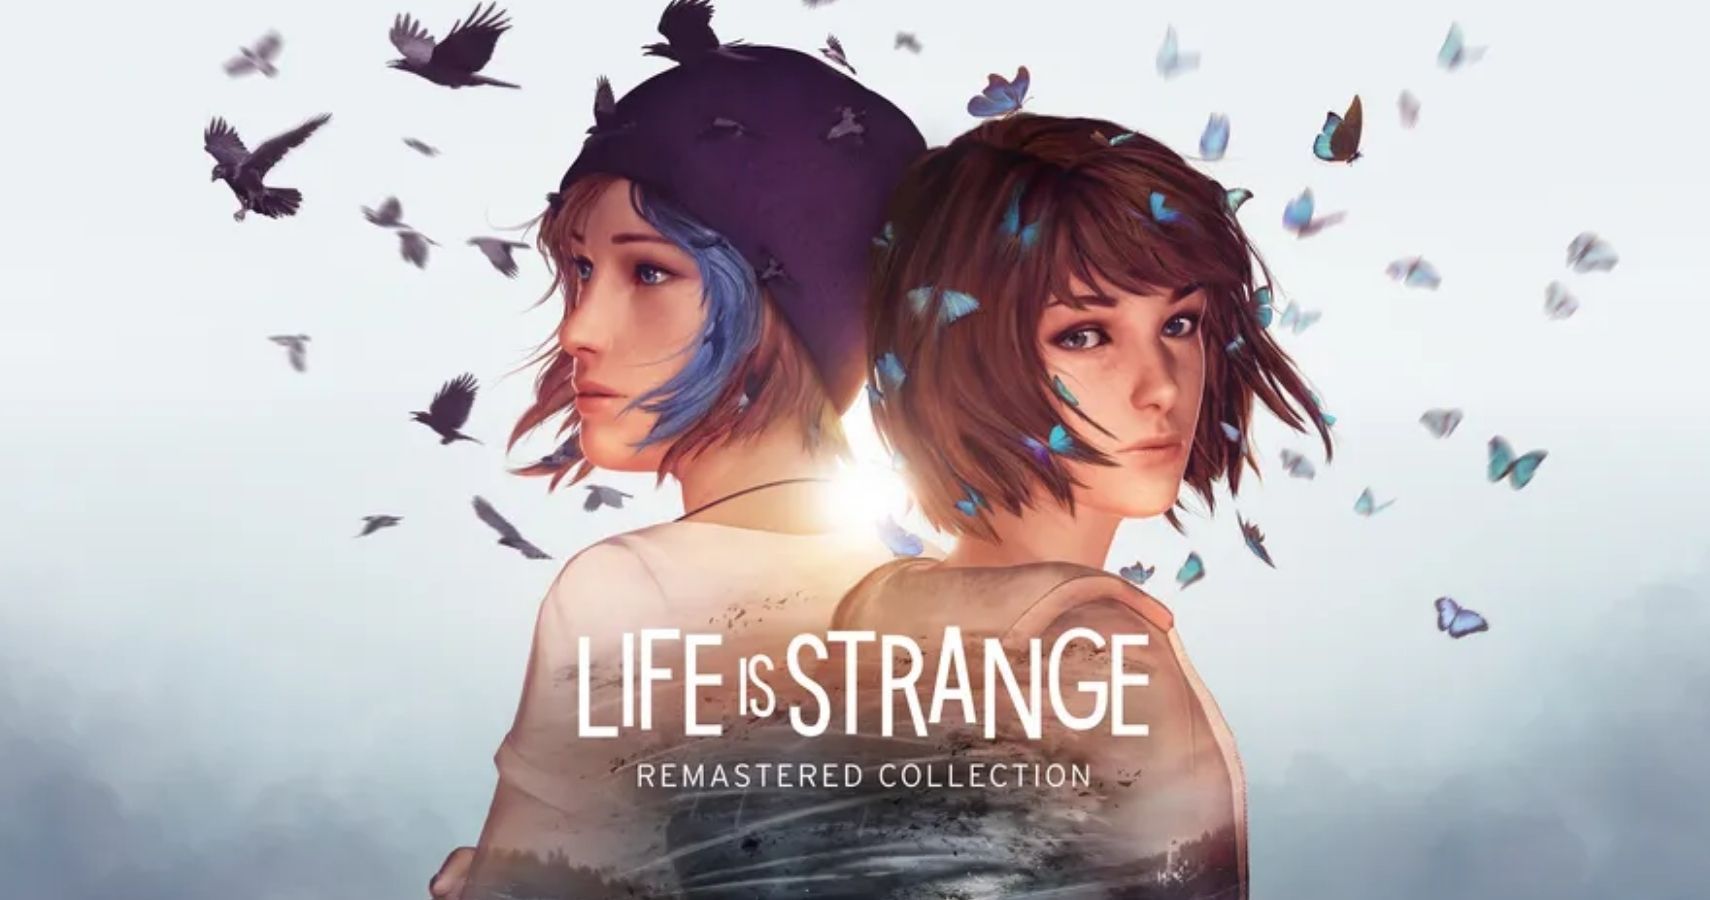 A blue haired woman is on the left. She is wearing a beanie hat. A brunette woman is on the right. They are back to back, and there are butterflies around them,